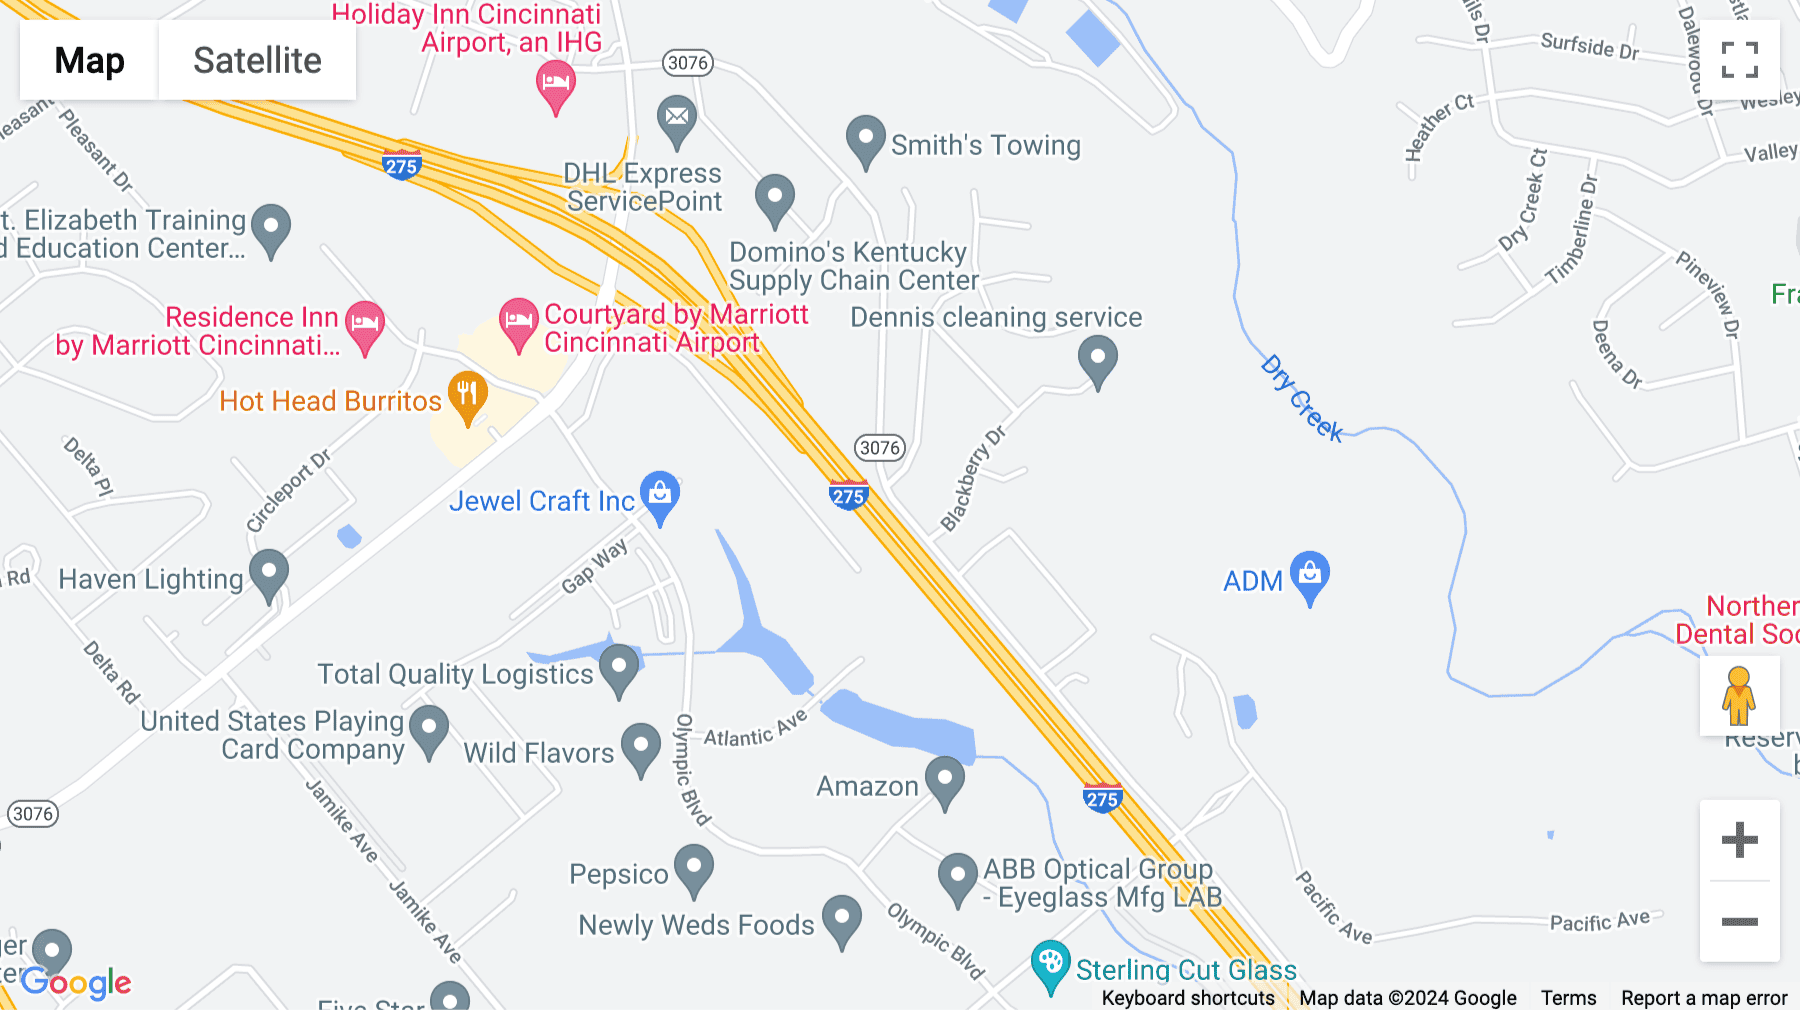 Click for interative map of 7310 Turfway Road Suite 550, Florence, Florence